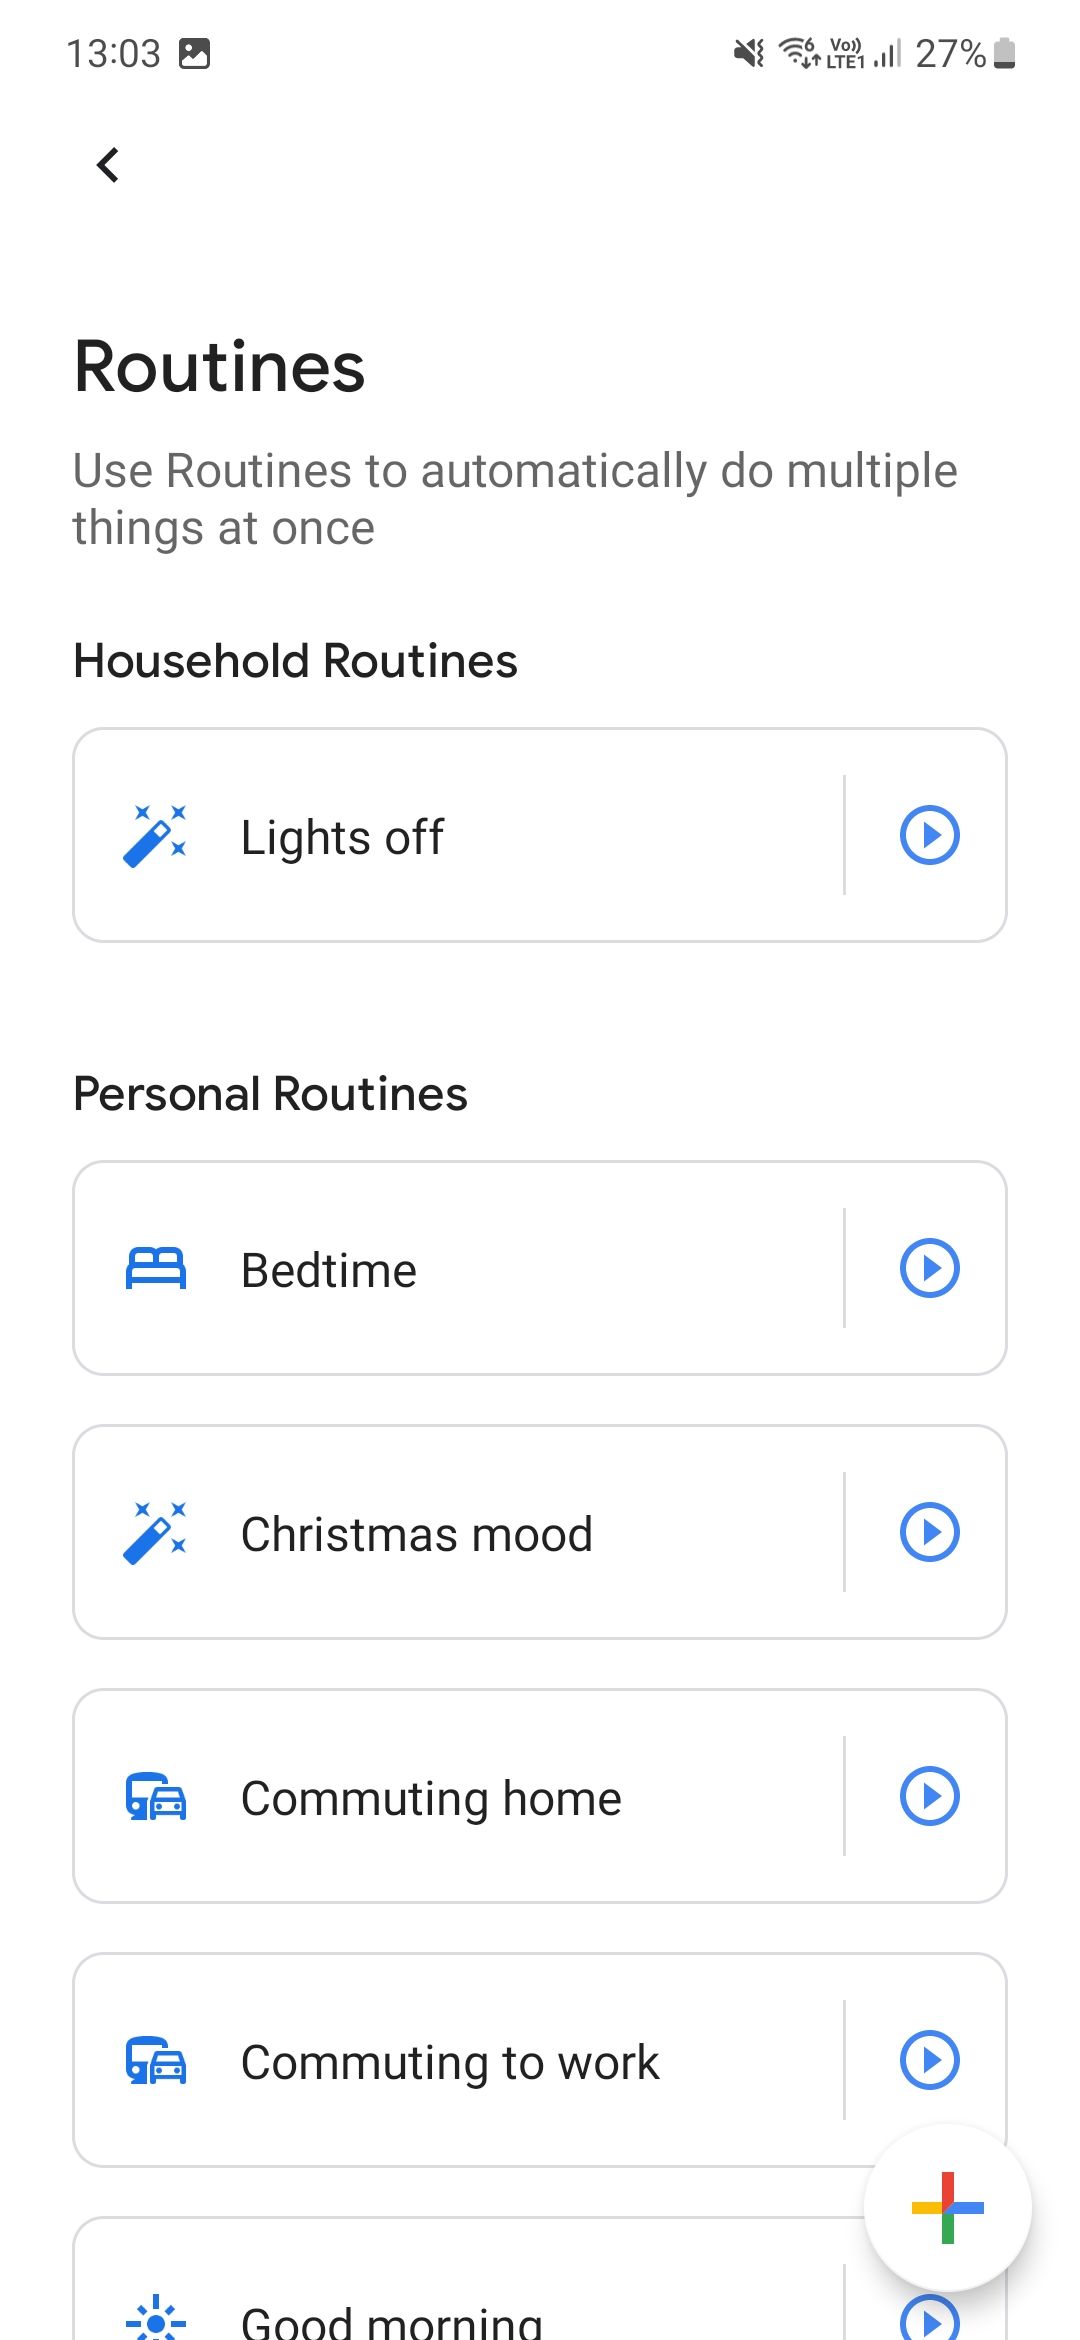 A screenshot showing the routines in Google Home